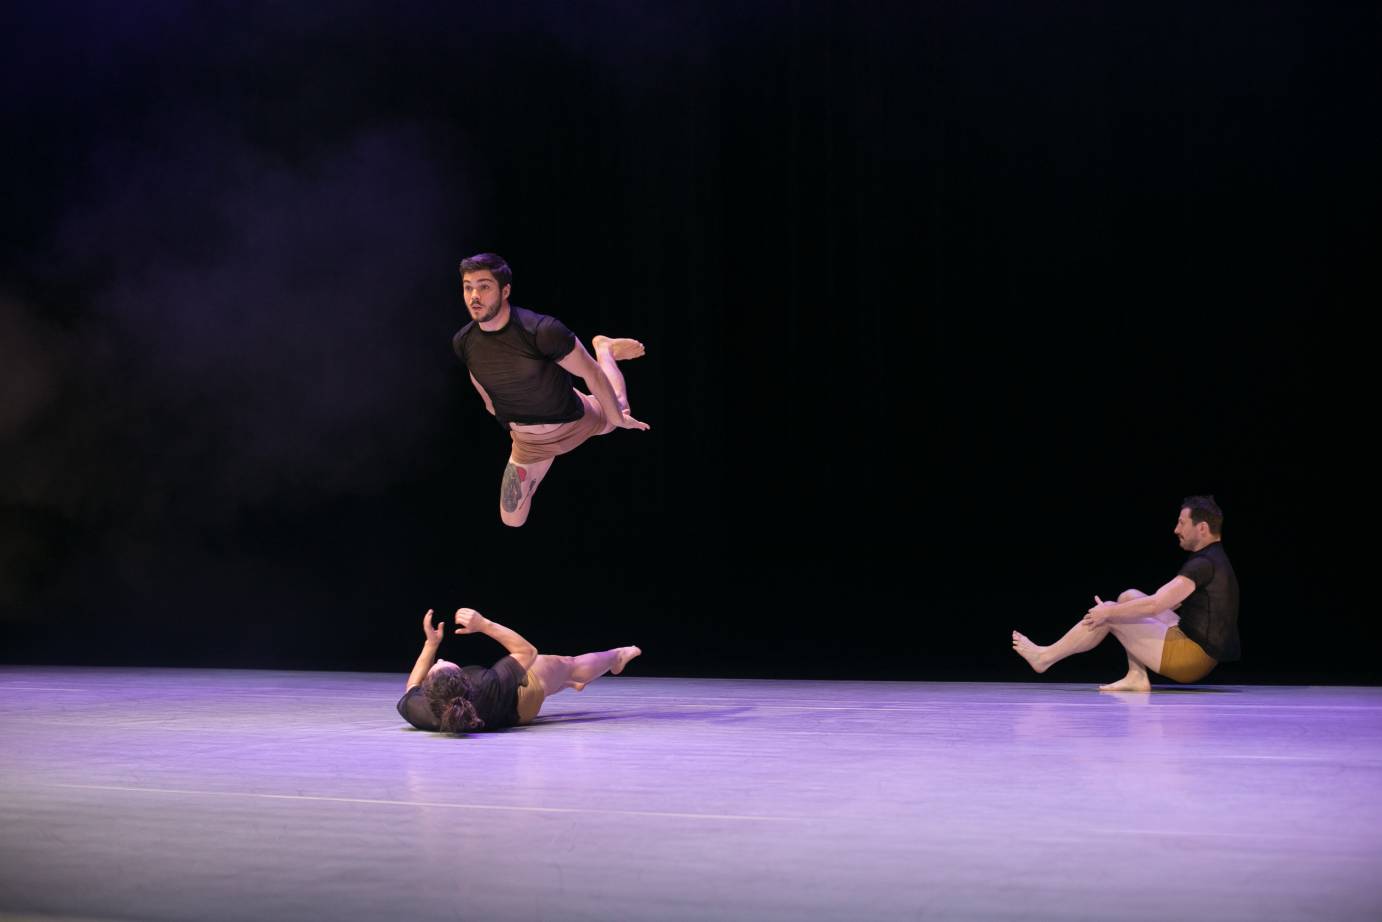 Two dancers roll on the floor while another jumps in the air parallel above one of them.